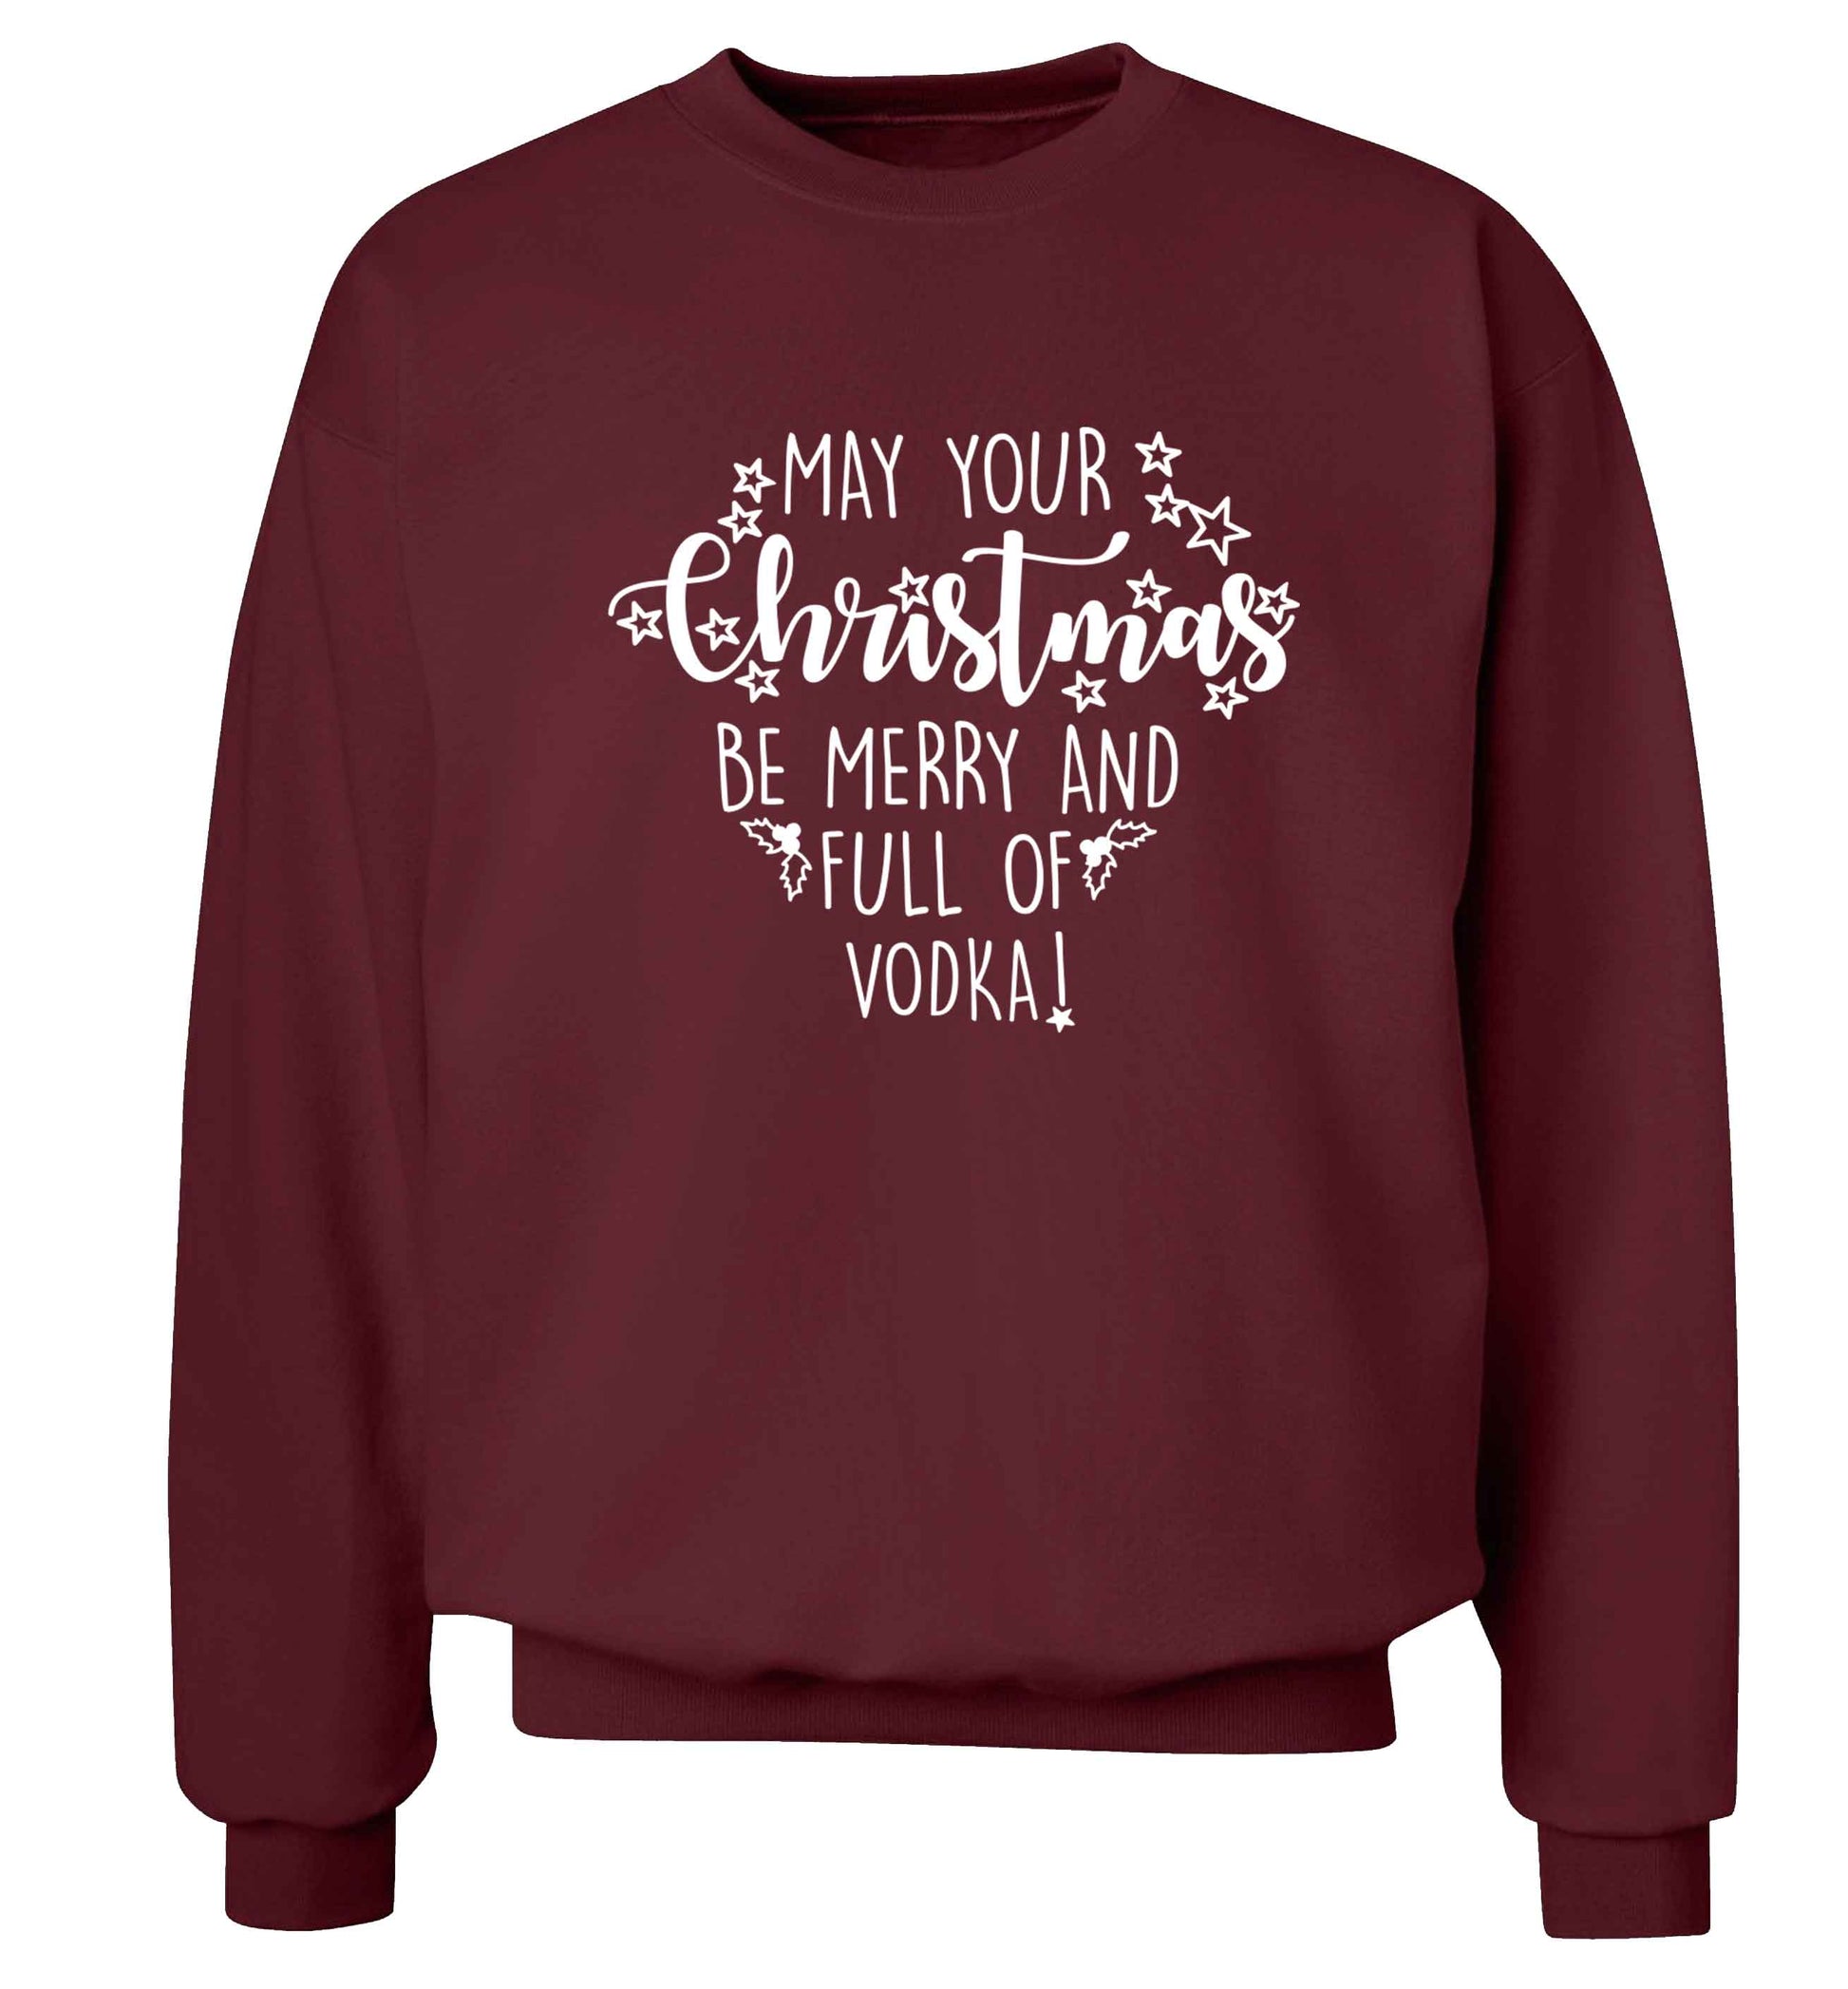 May your Christmas be merry and full of vodka Adult's unisex maroon Sweater 2XL